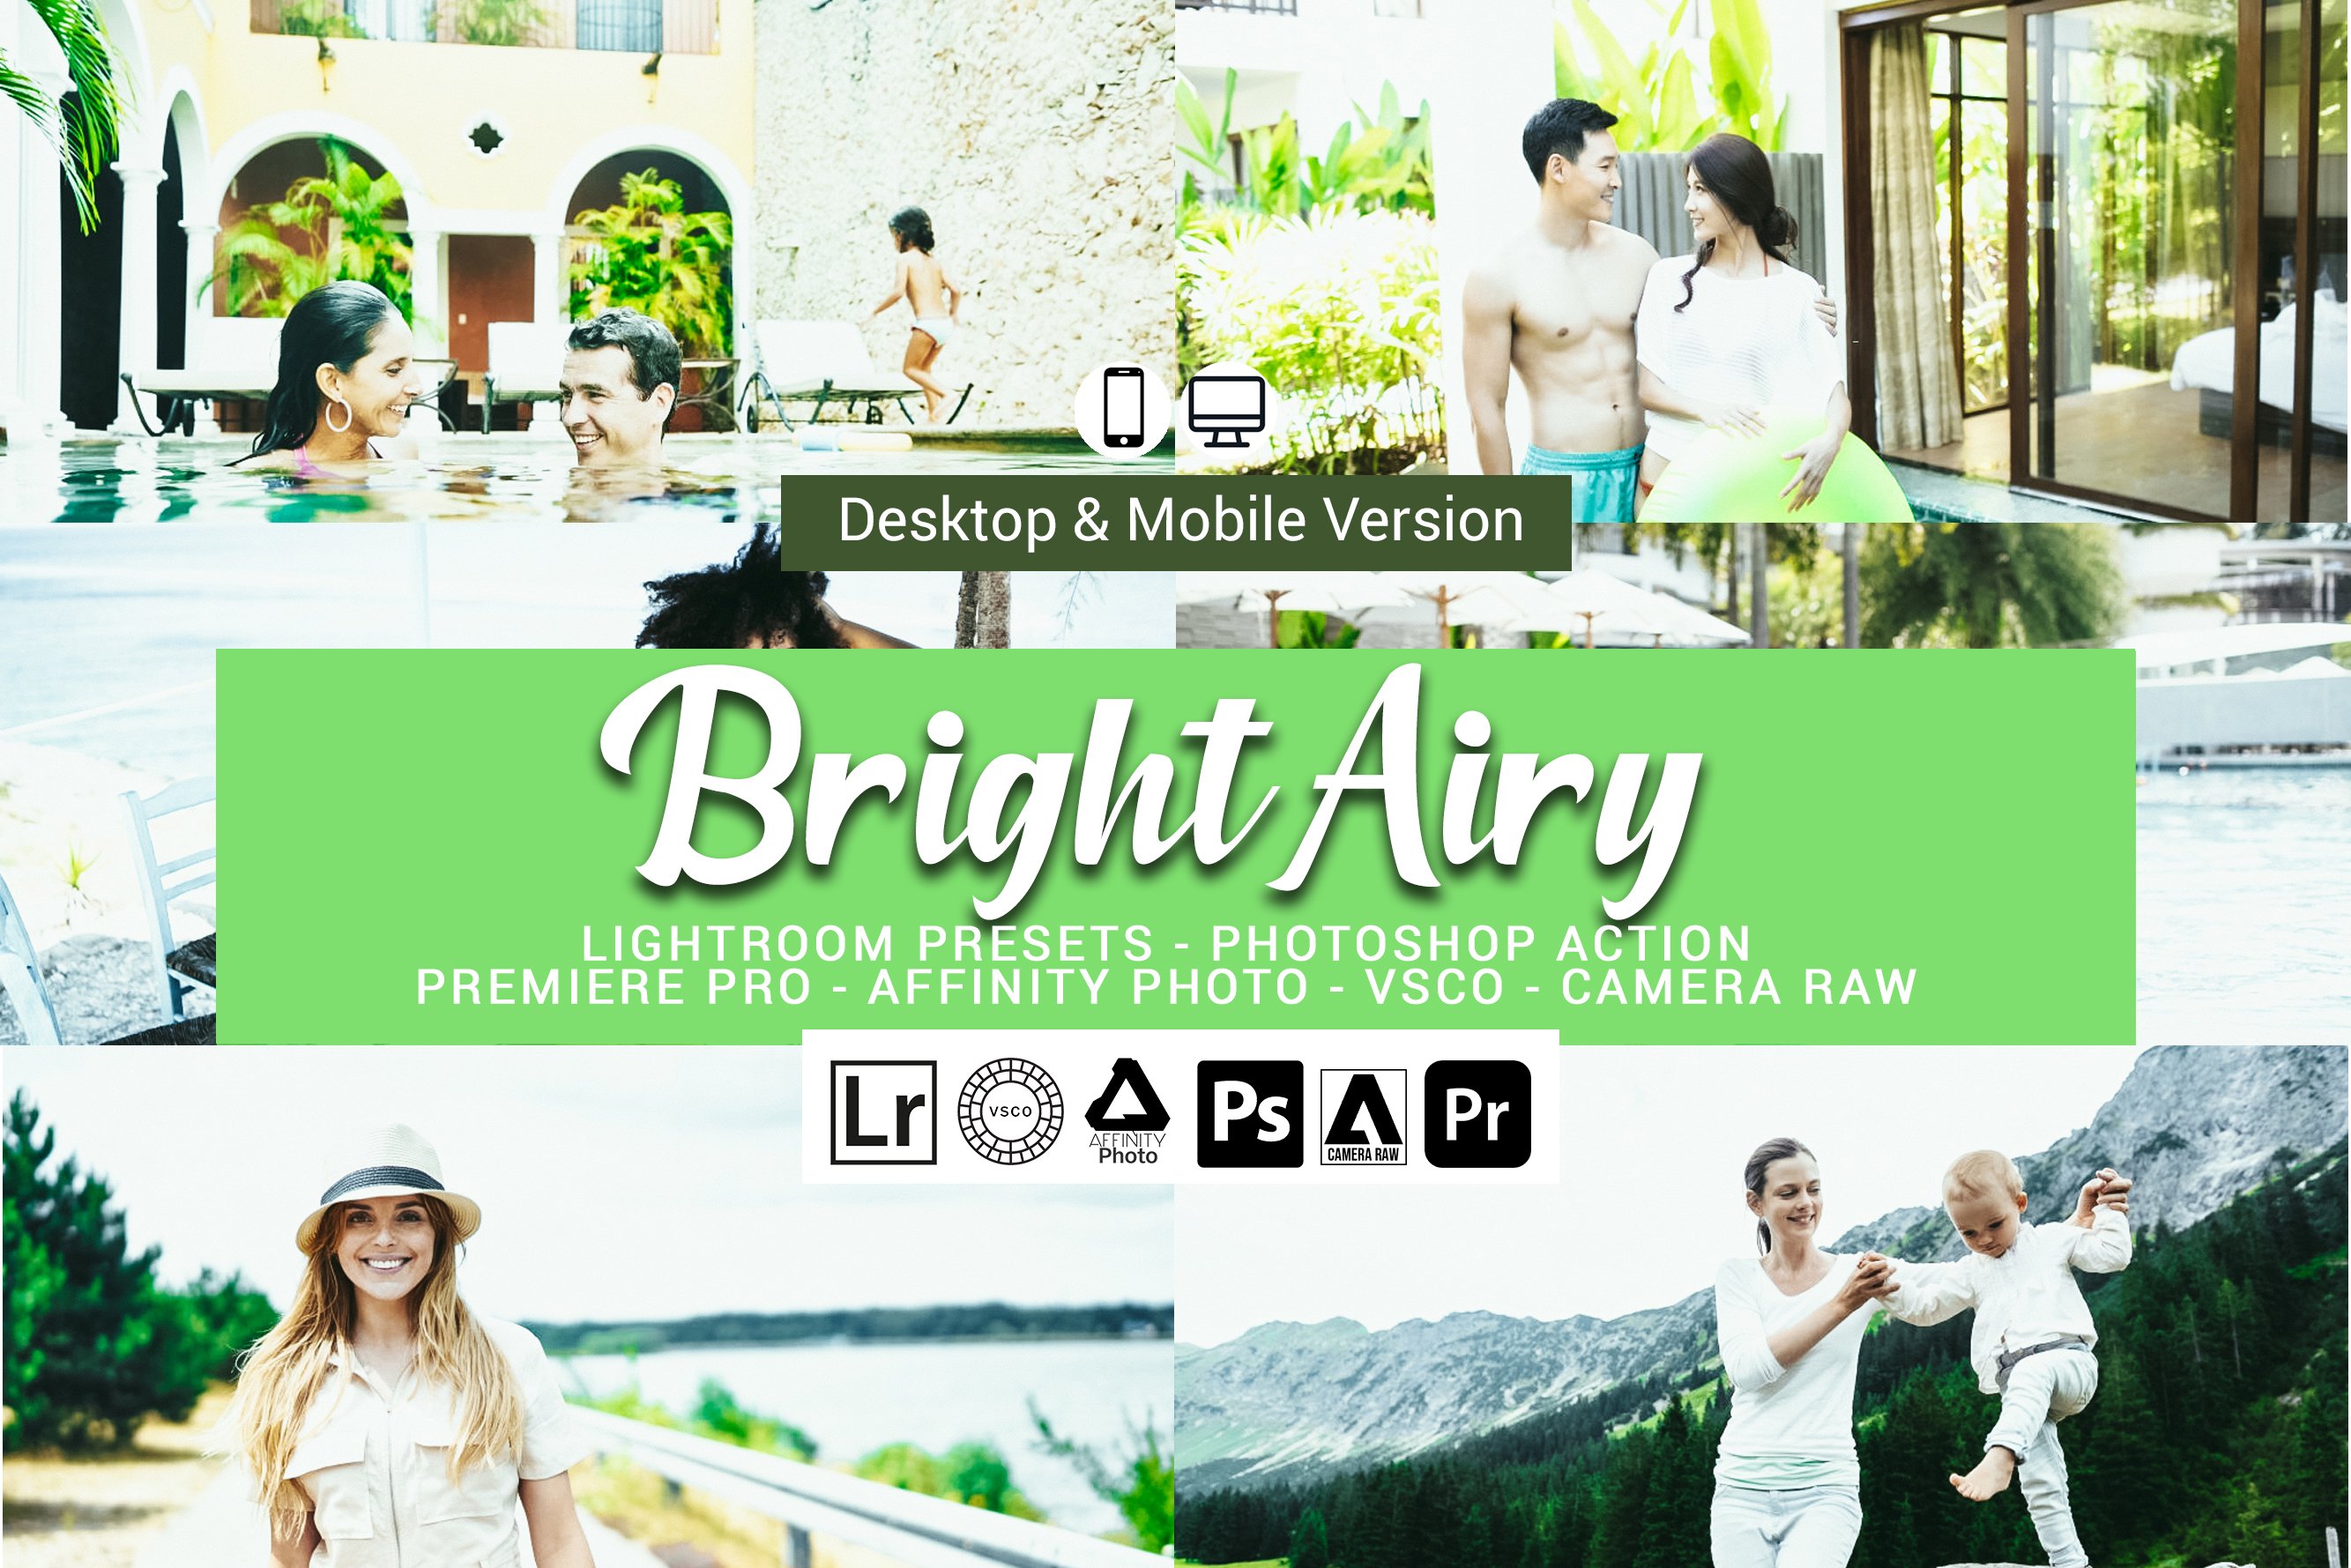 Bright Airy Lightroom Presetscover image.